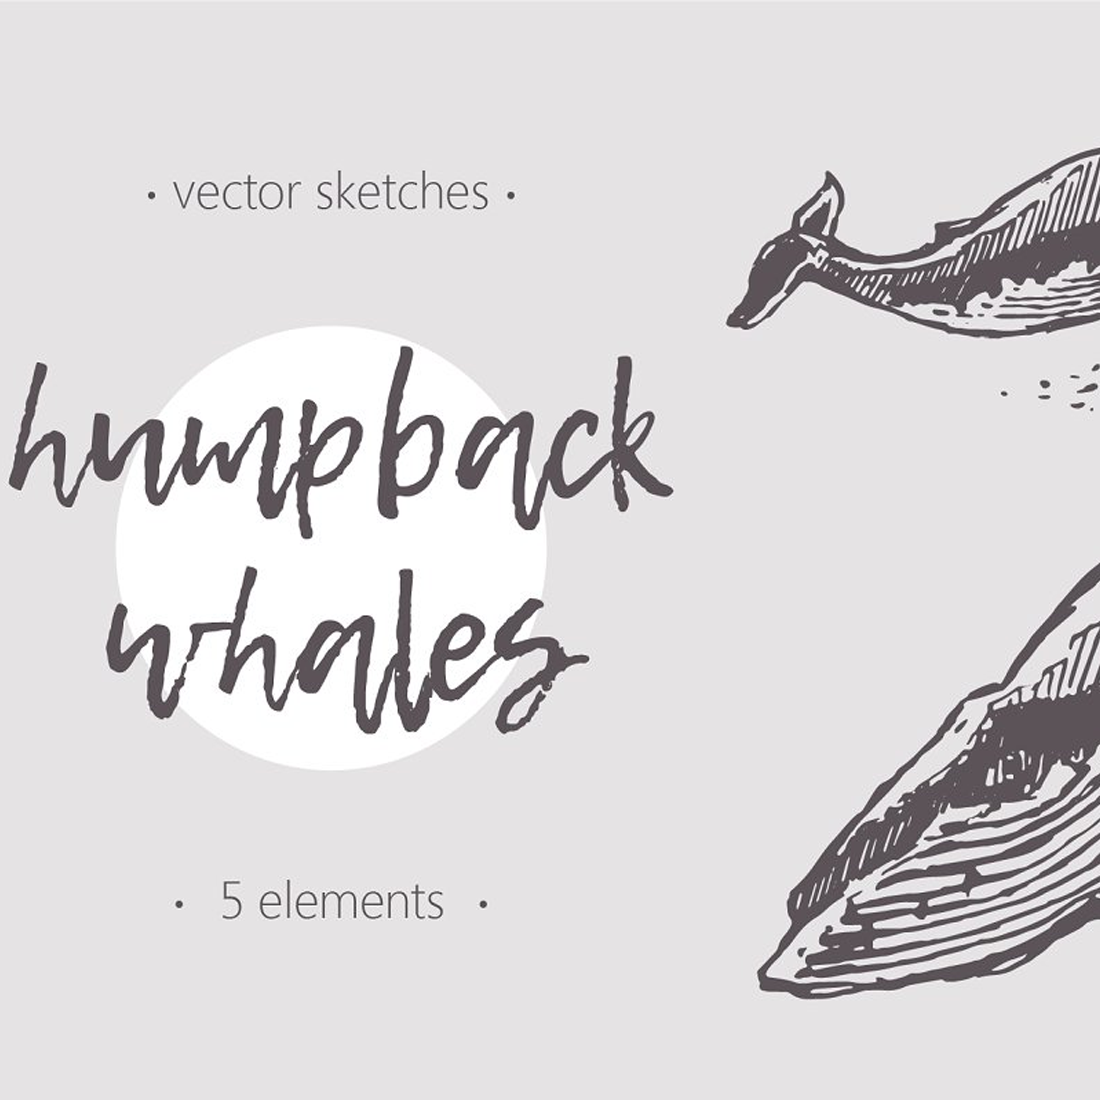 Images preview sketches of humpback whales.